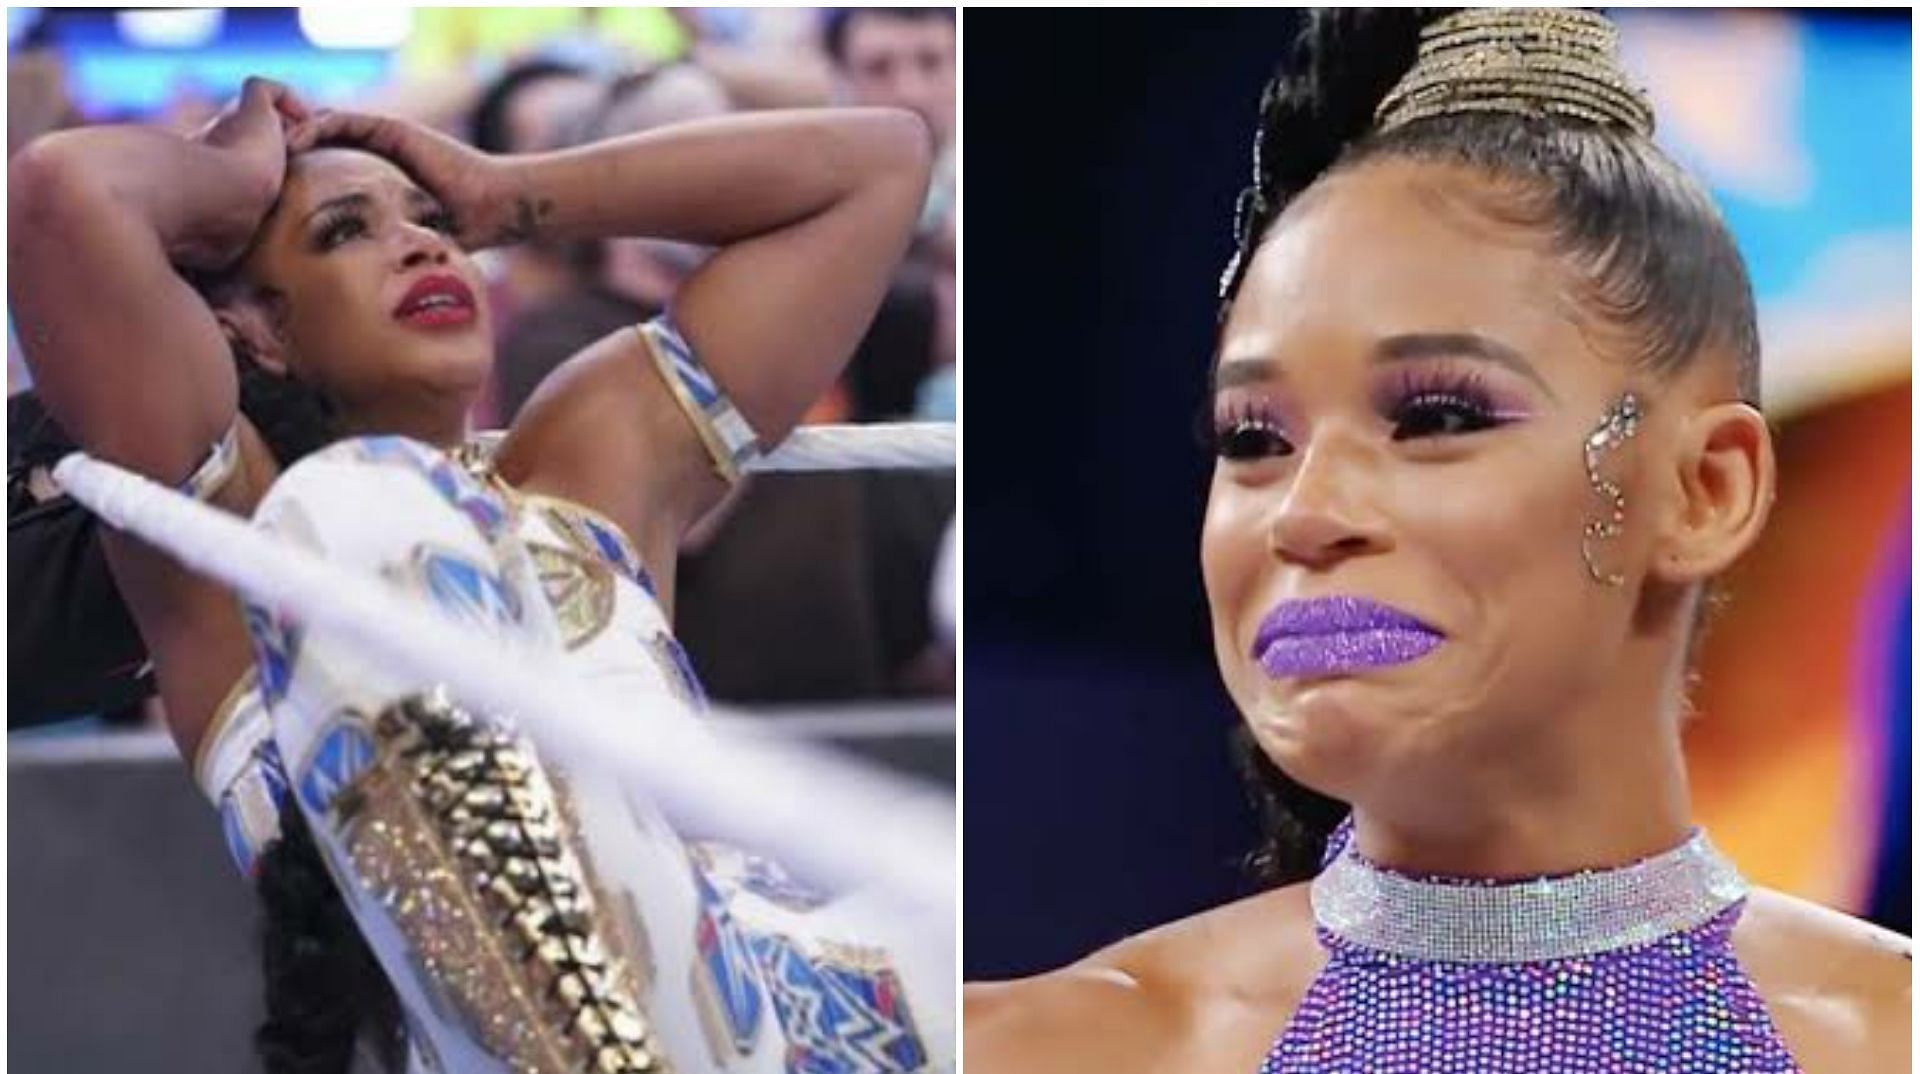 Bianca Belair failed to retain her title at Night of Champions.